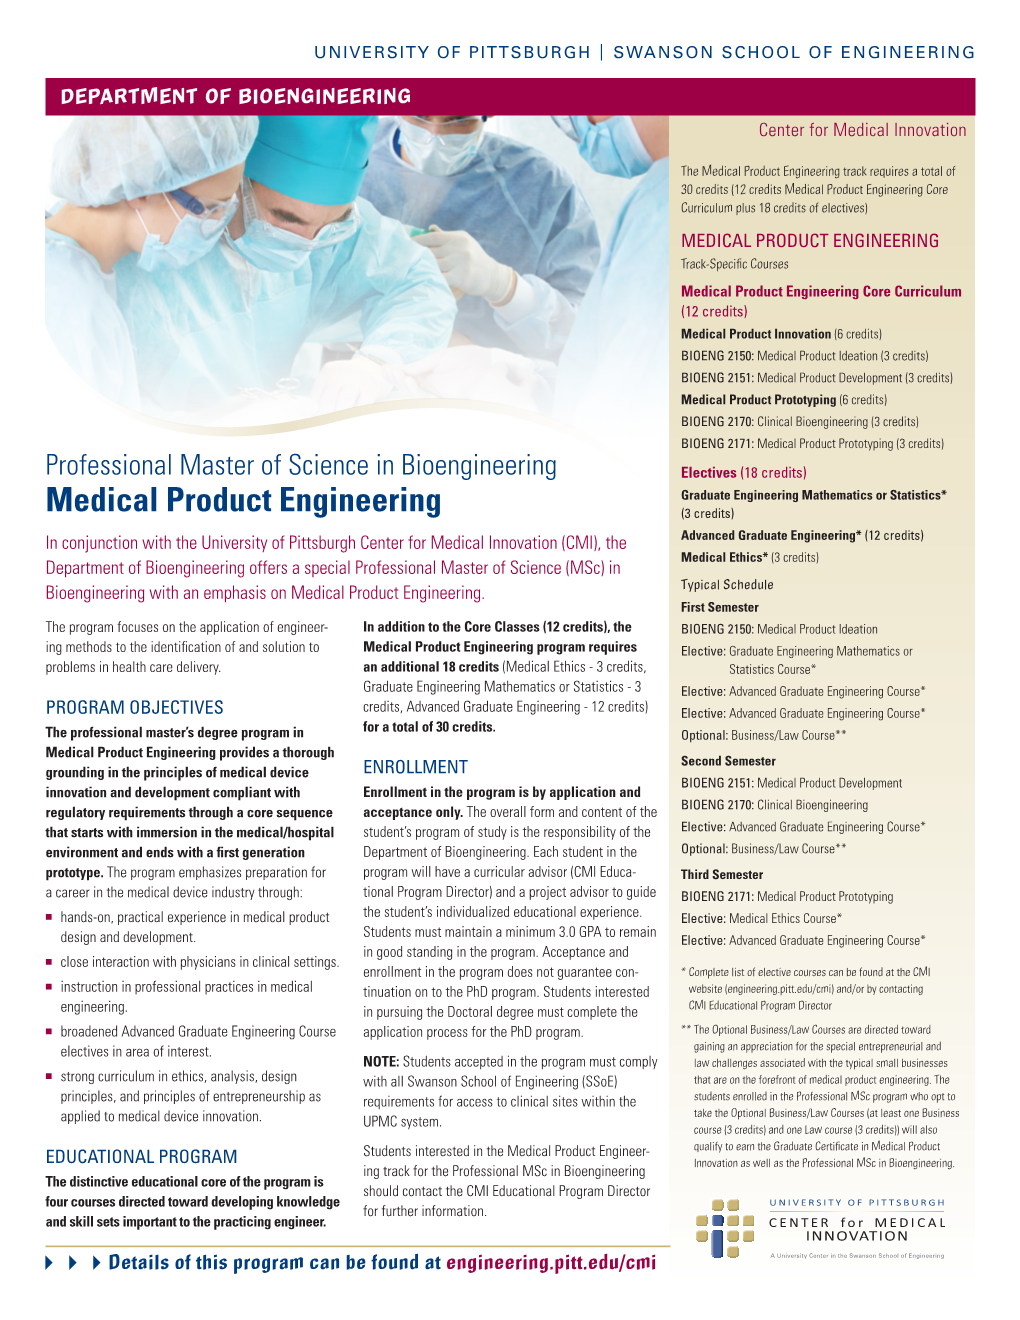 Medical Product Engineering